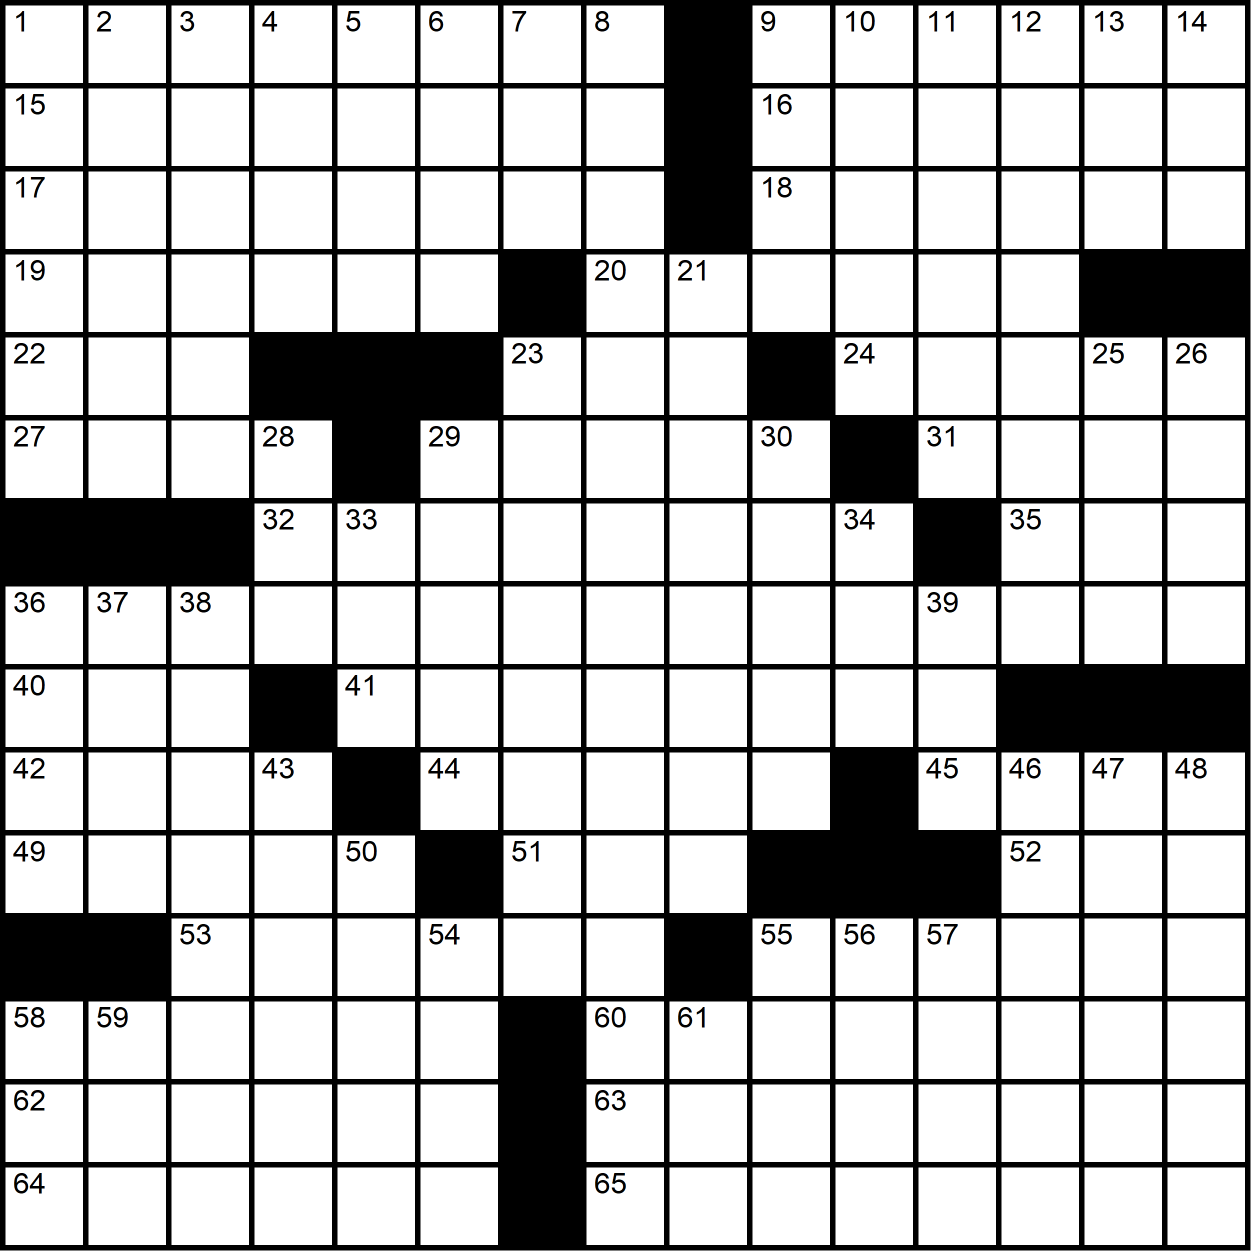 A 15x15 themeless crossword with a dense middle.